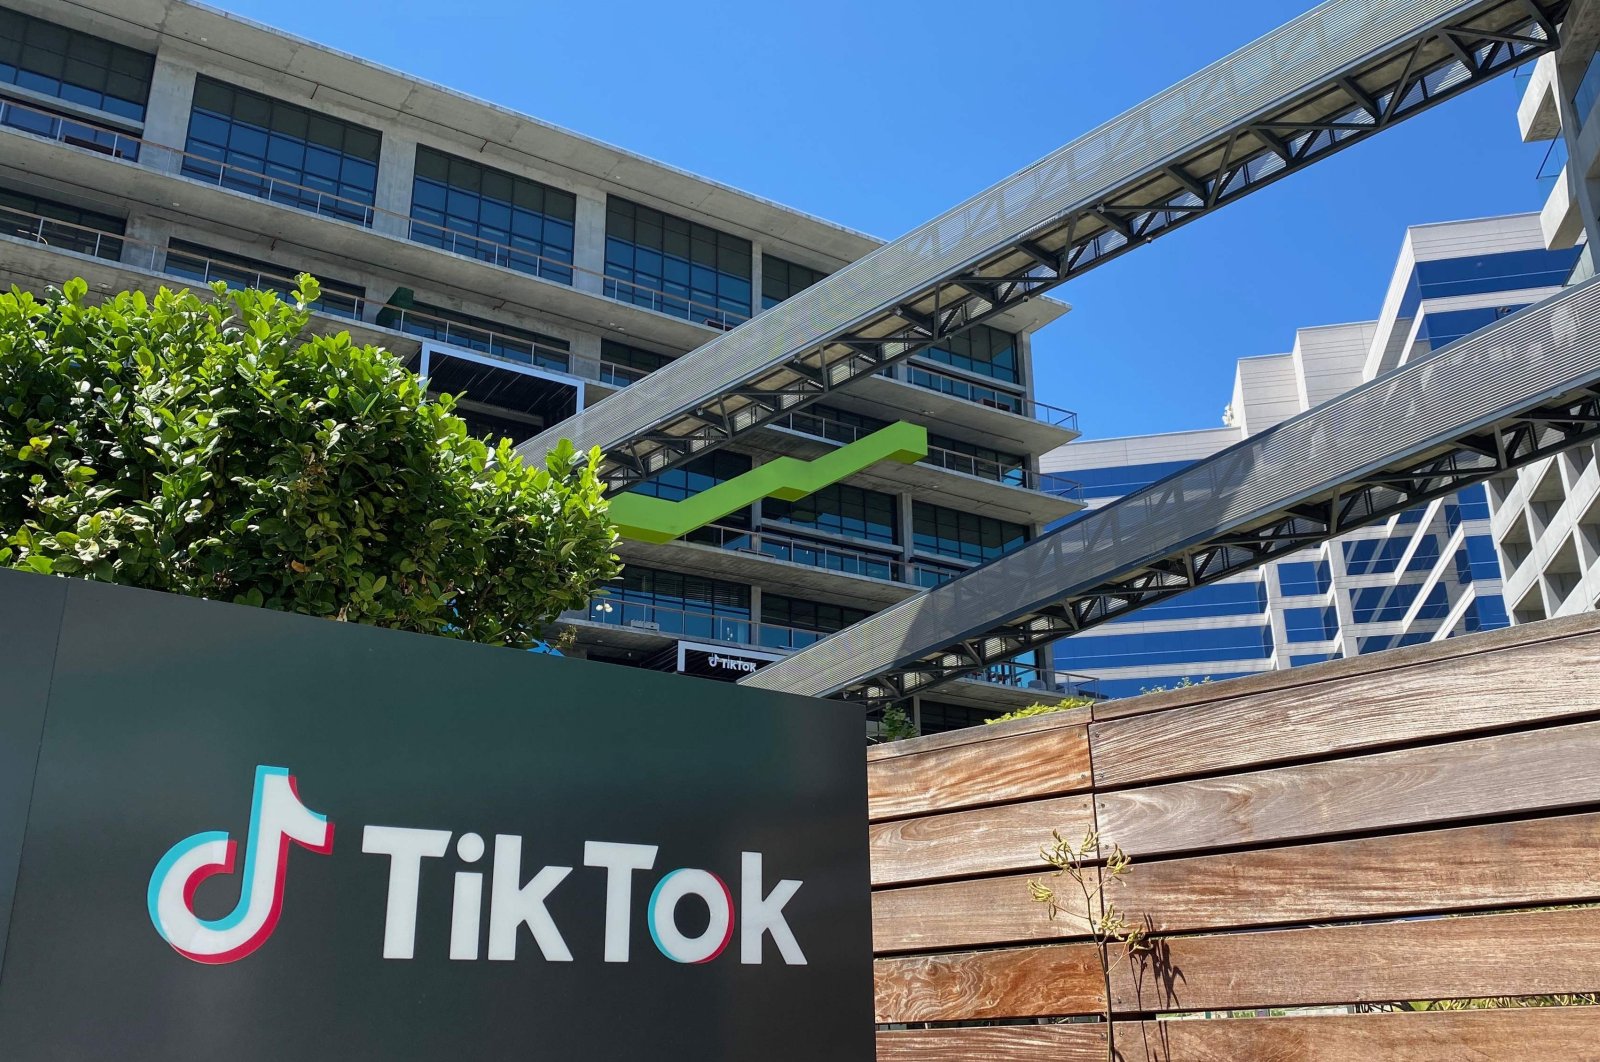 The logo of the Chinese video app TikTok is seen on the side of the company's new office space at the C3 campus in Culver City, in the westside of Los Angeles, U.S., Aug. 11, 2020. (AFP Photo)